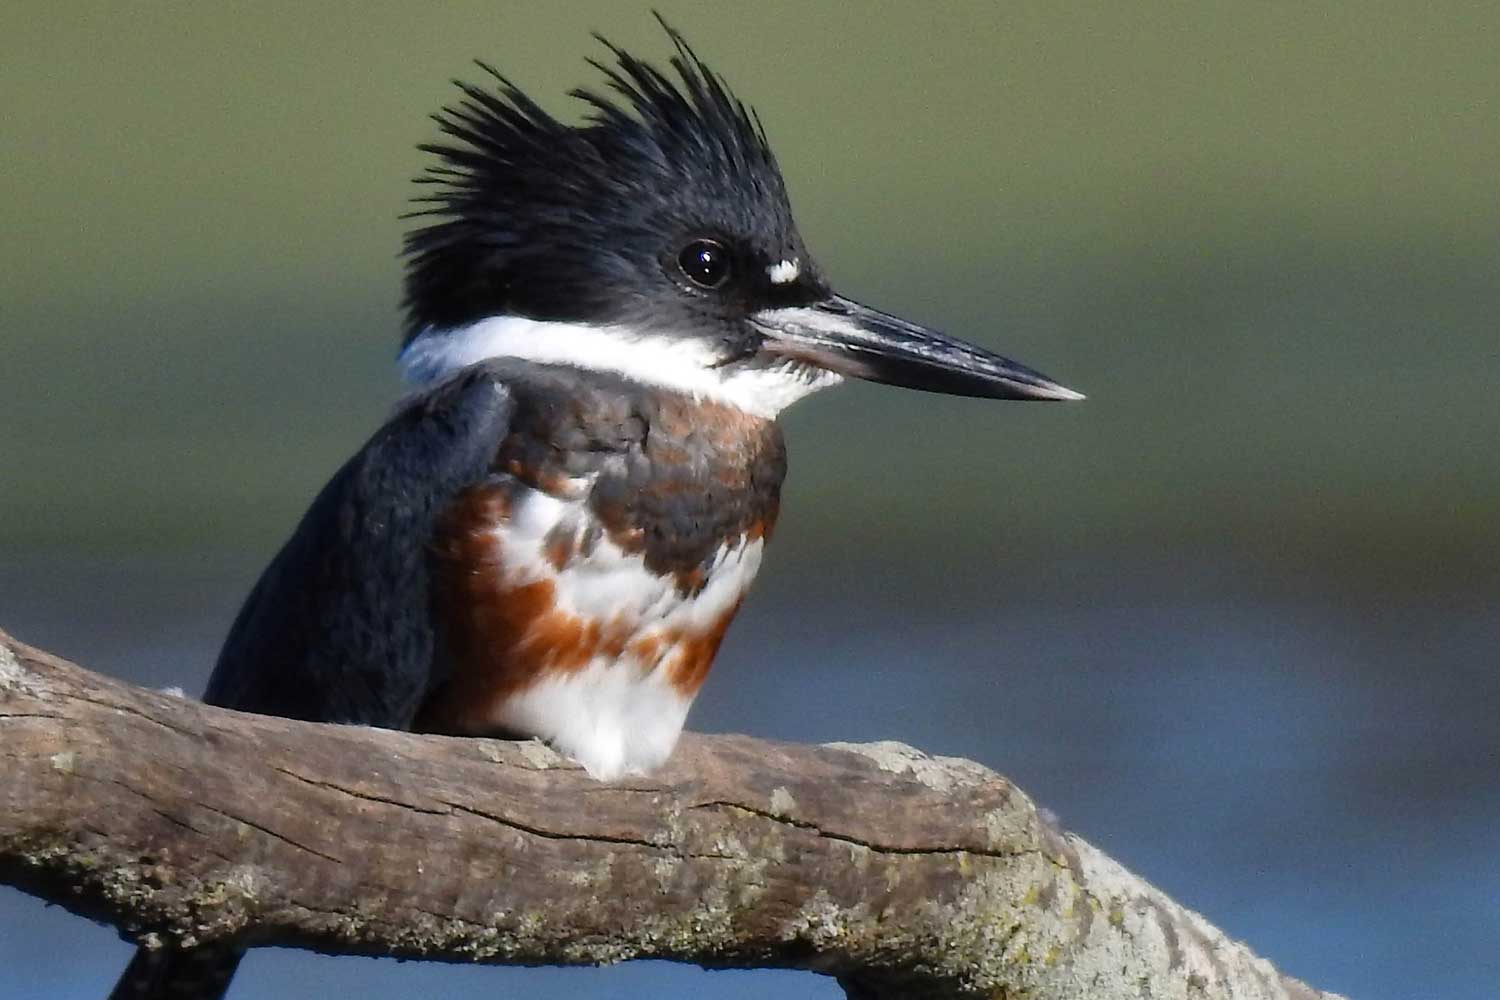 A belted kingfisher on a branch.